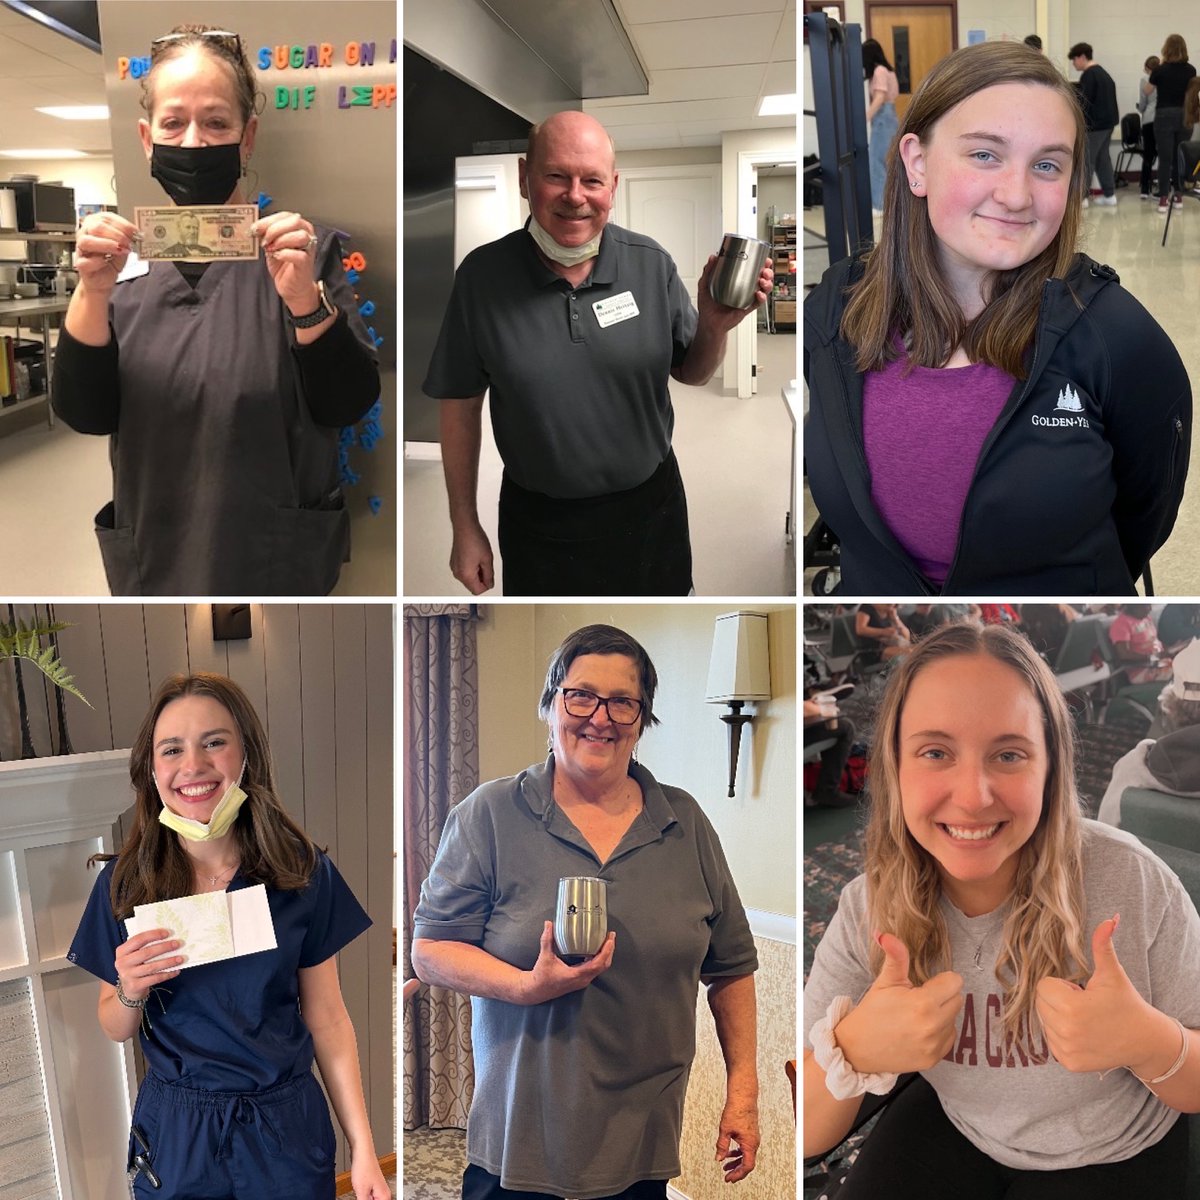 Our April spring-themed winners received either house cleaning, garden supplies, or everyone's favorite regardless of the season - cash!! #loveourstaff